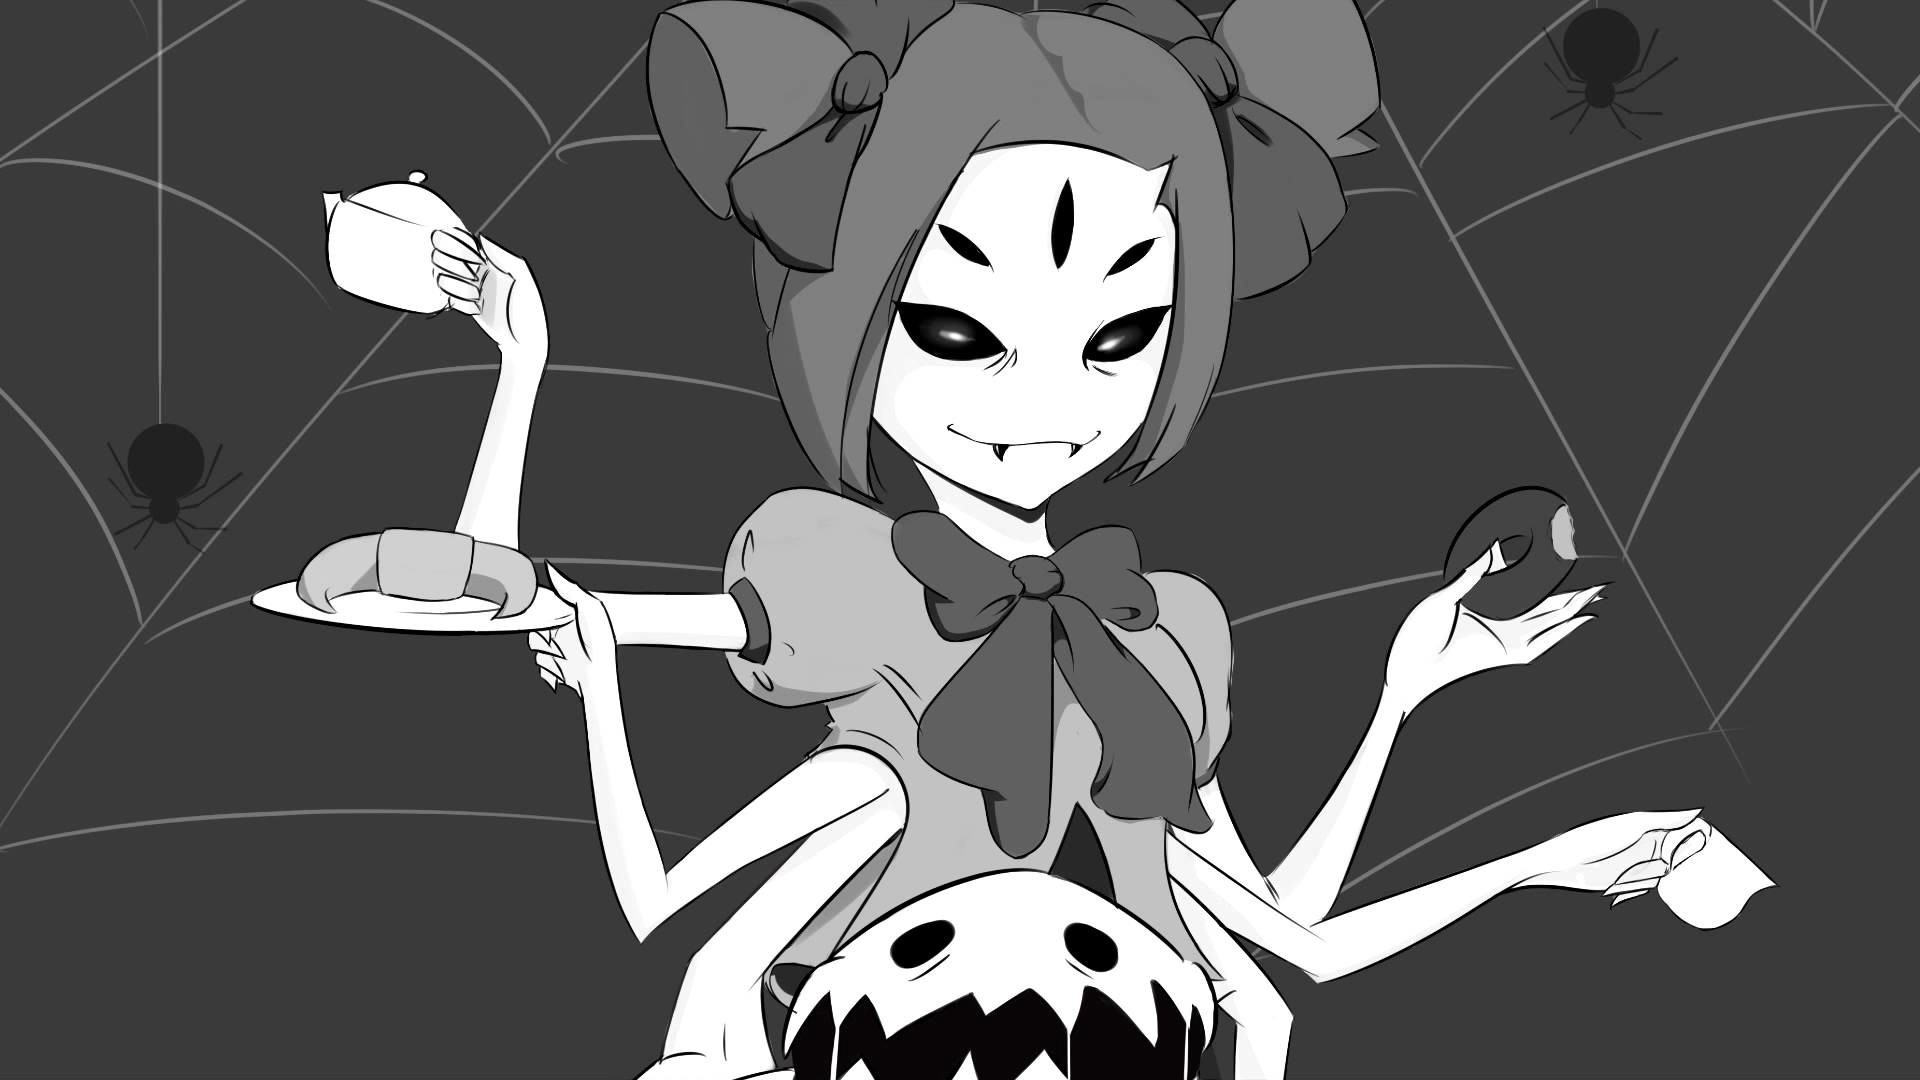 UNDERTALE The Game images Muffet Wallpaper HD wallpaper and background photos